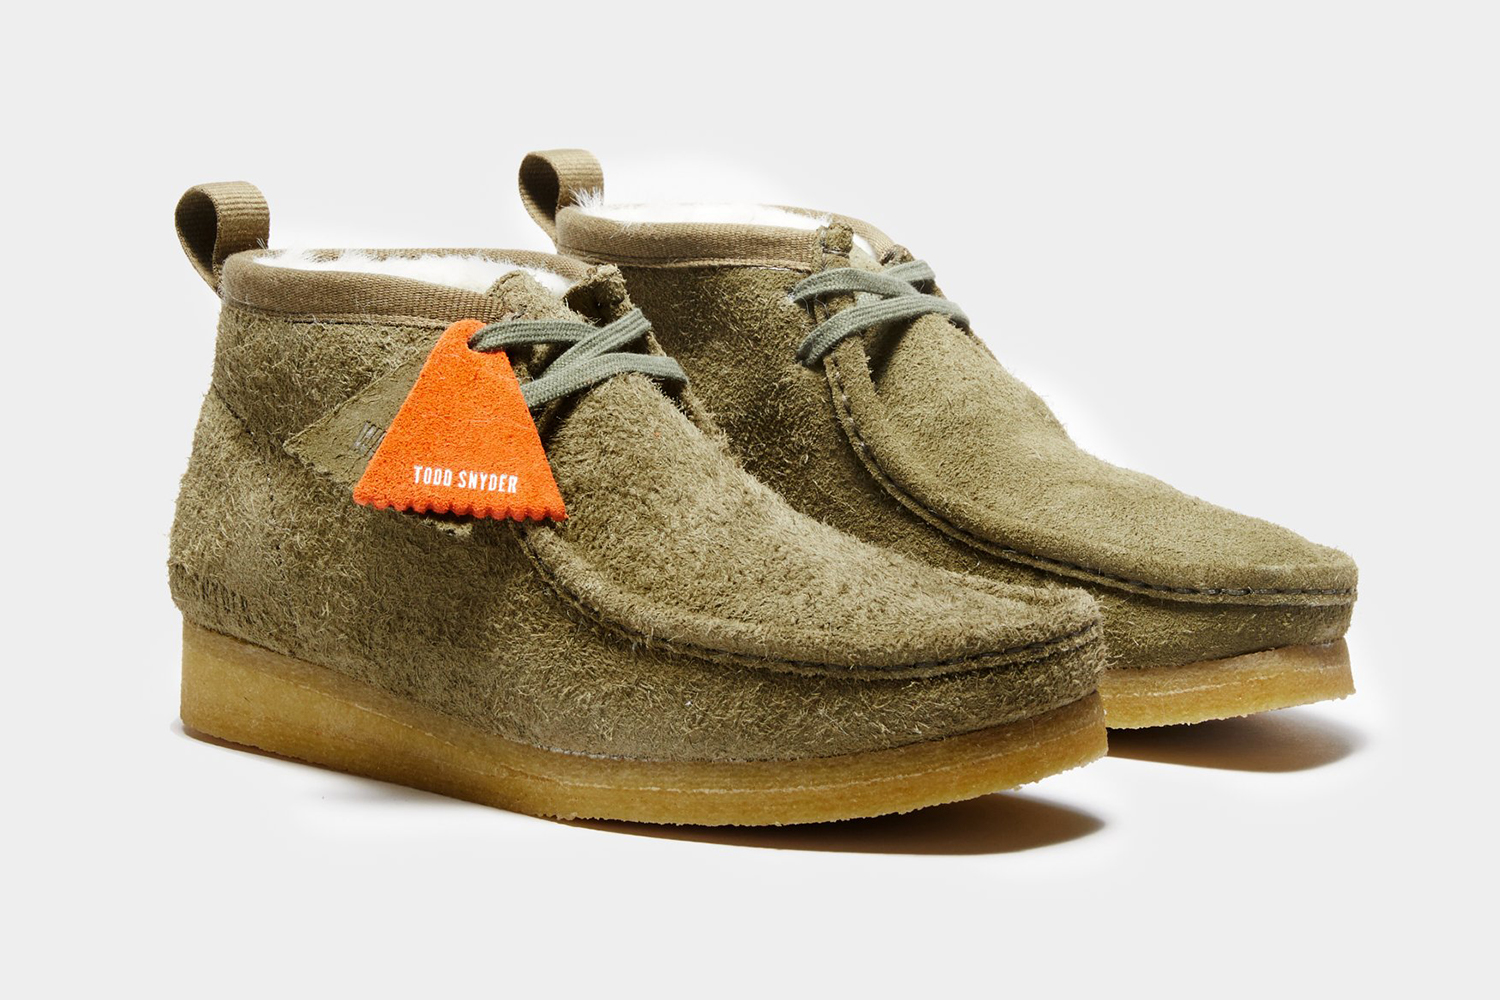 Todd Snyder x Clarks Shearling Wallabee in Olive